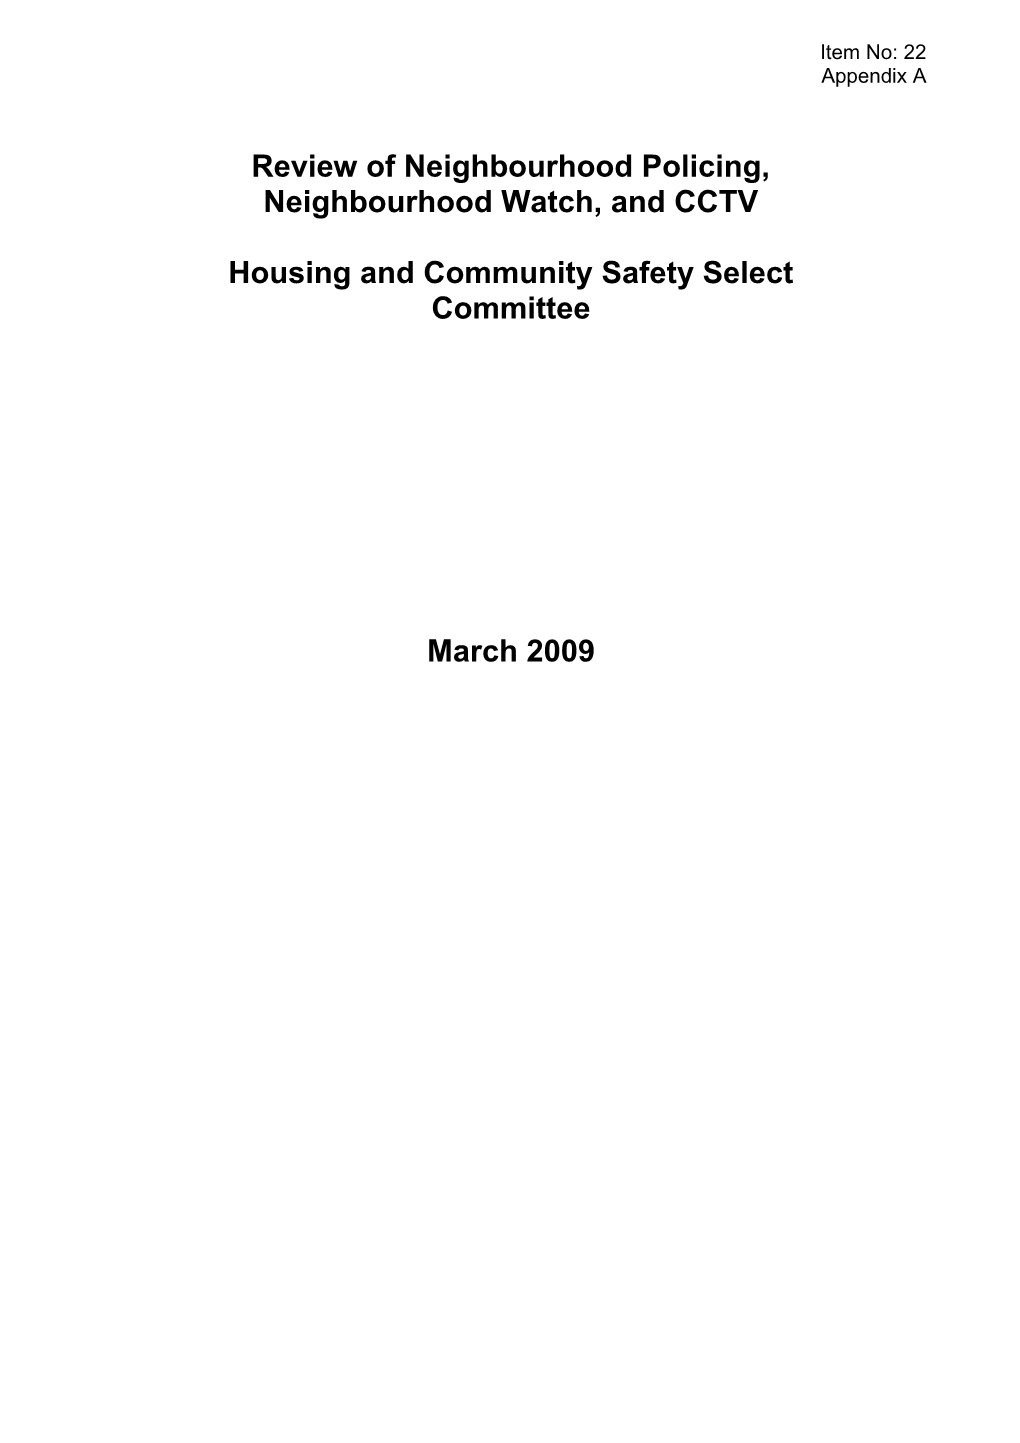 Housing and Community Safety Selectcommittee